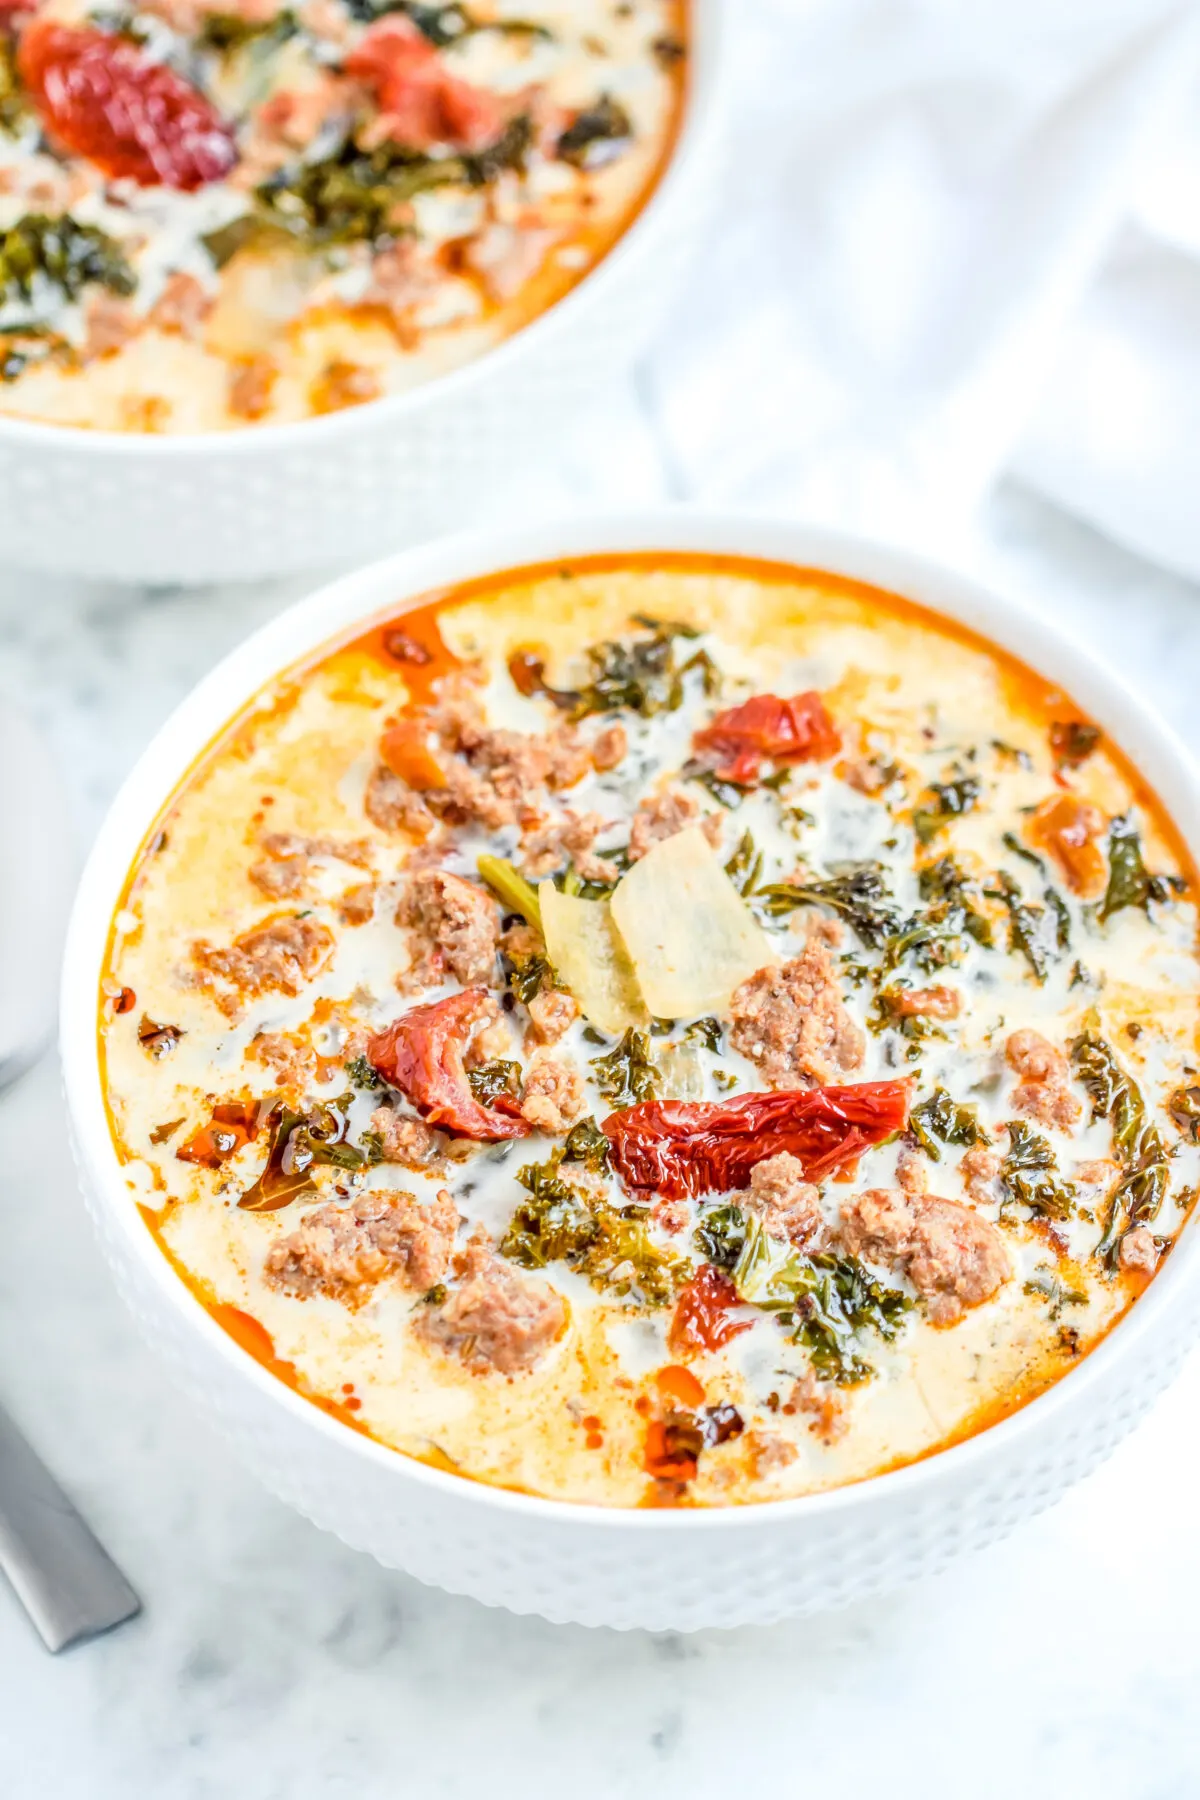 This Keto Tuscan soup recipe is a low carb take on the classic zuppa toscana. It's hearty, creamy, full of flavour and made in just one-pot!